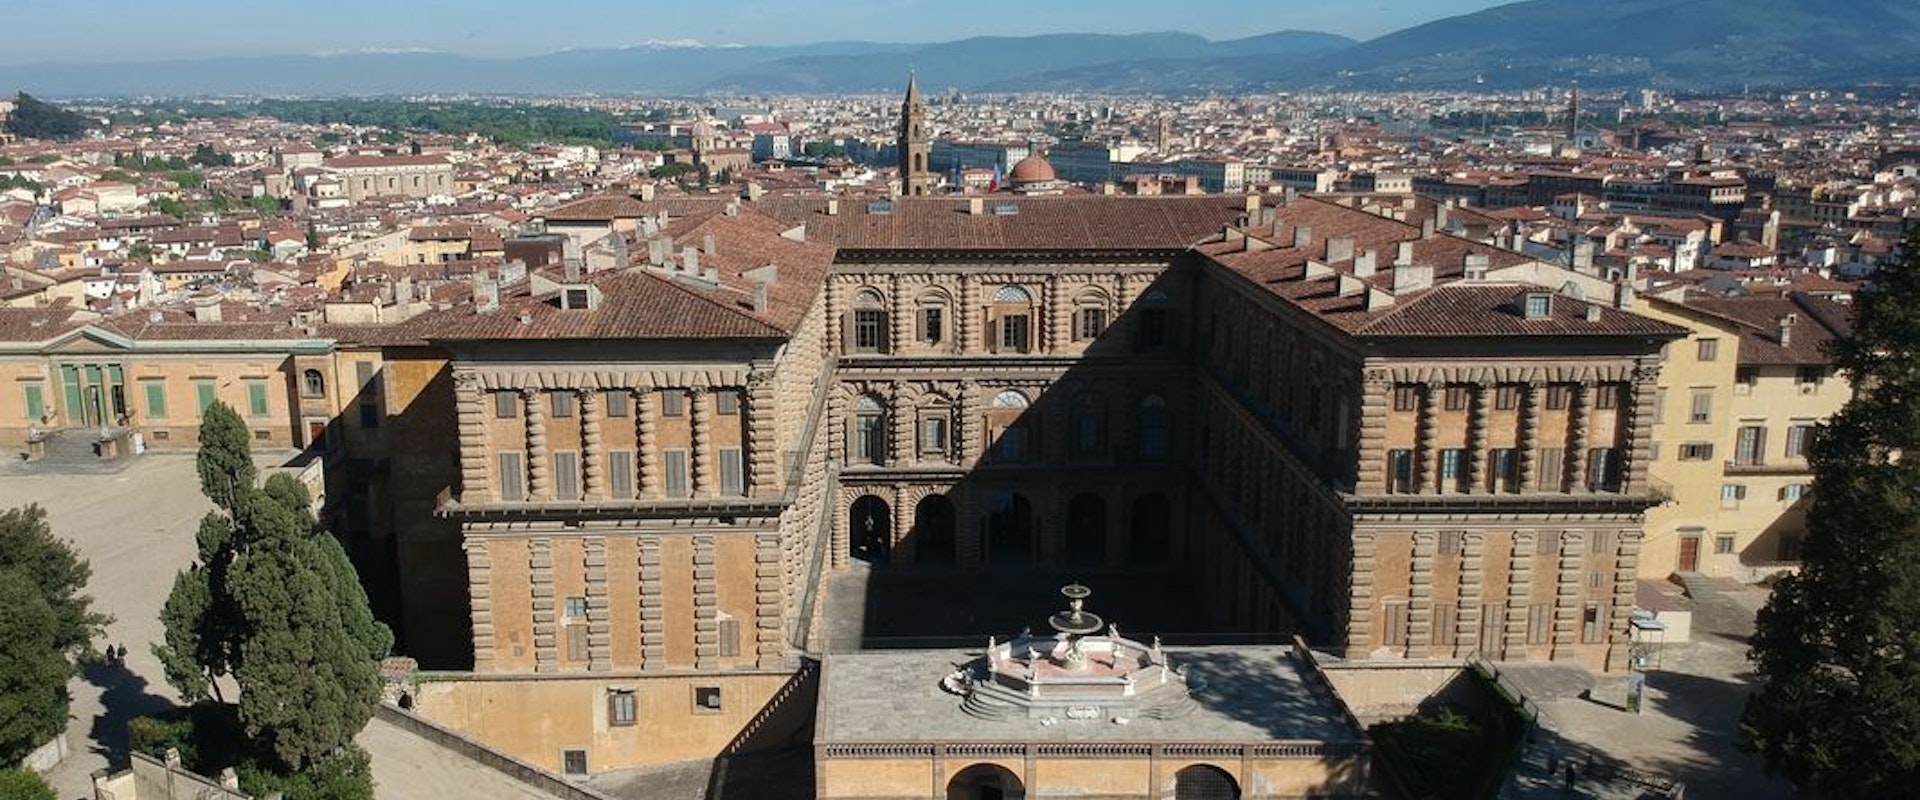 4 August free admission to Pitti Palace and Boboli Gardens!